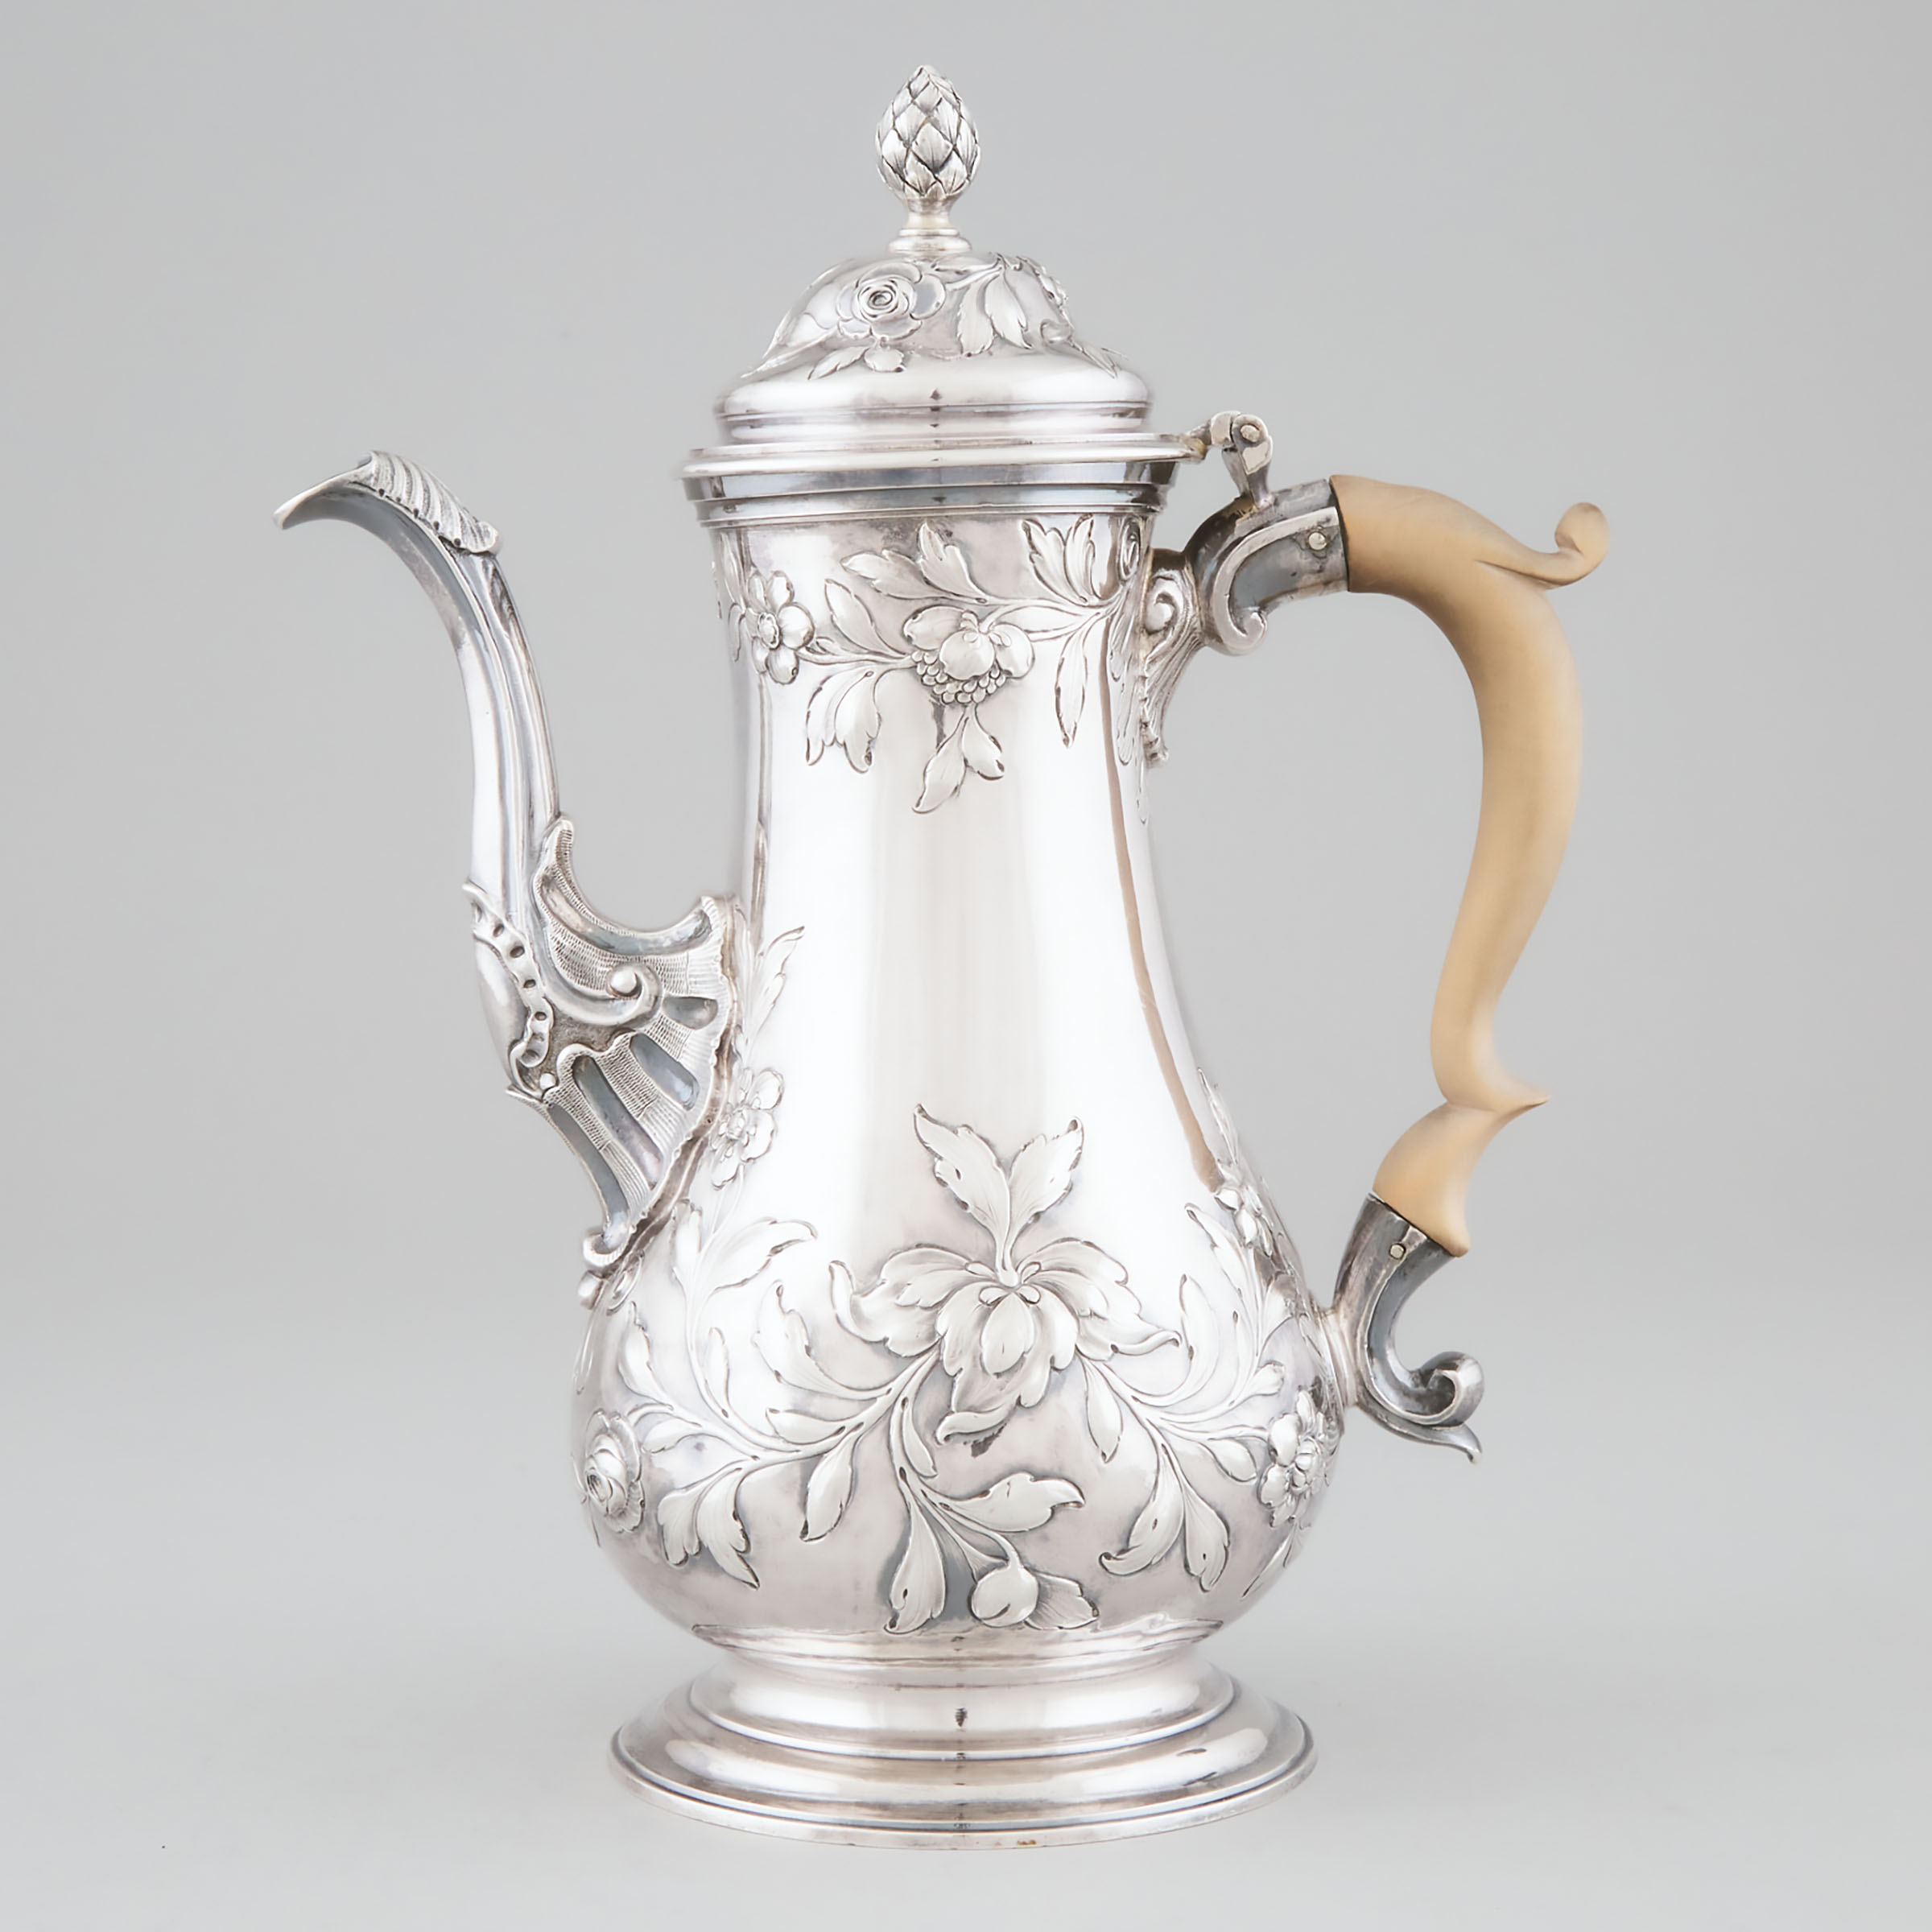 George III Silver Baluster Coffee Pot, Thomas Whipham & Charles Wright, London, 1763